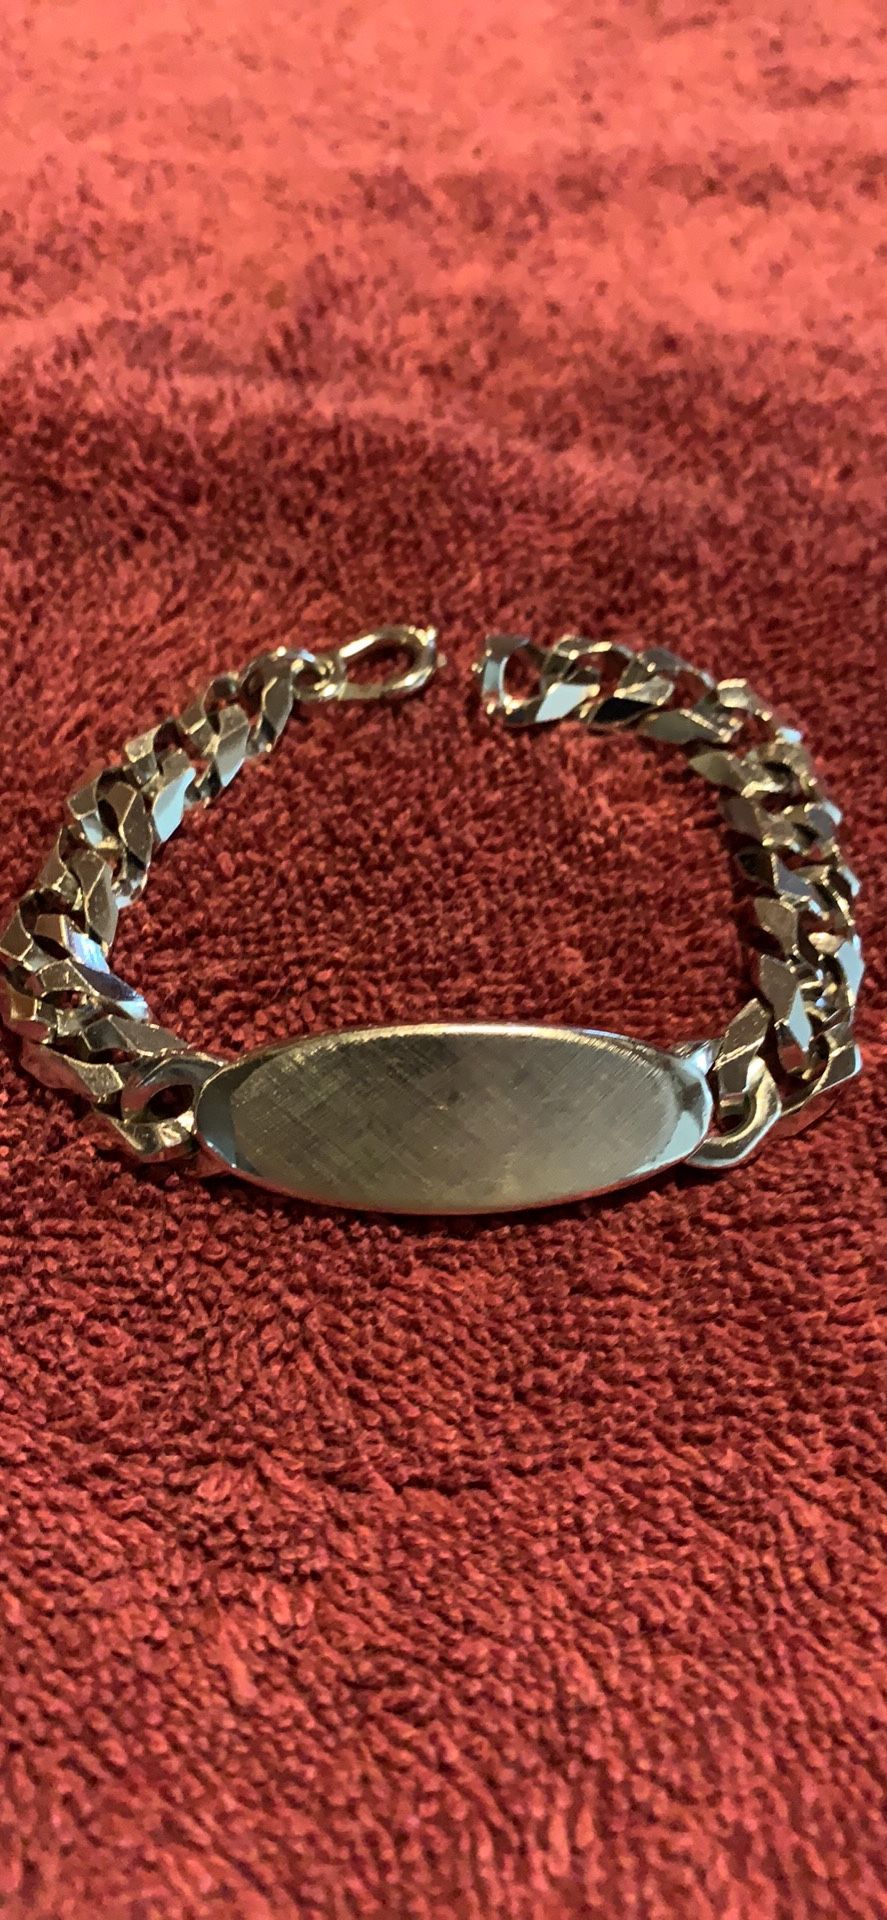 BRACELET BY SWANK. STAINLESS STEEL AND ENGRAVABLE. 1960’S